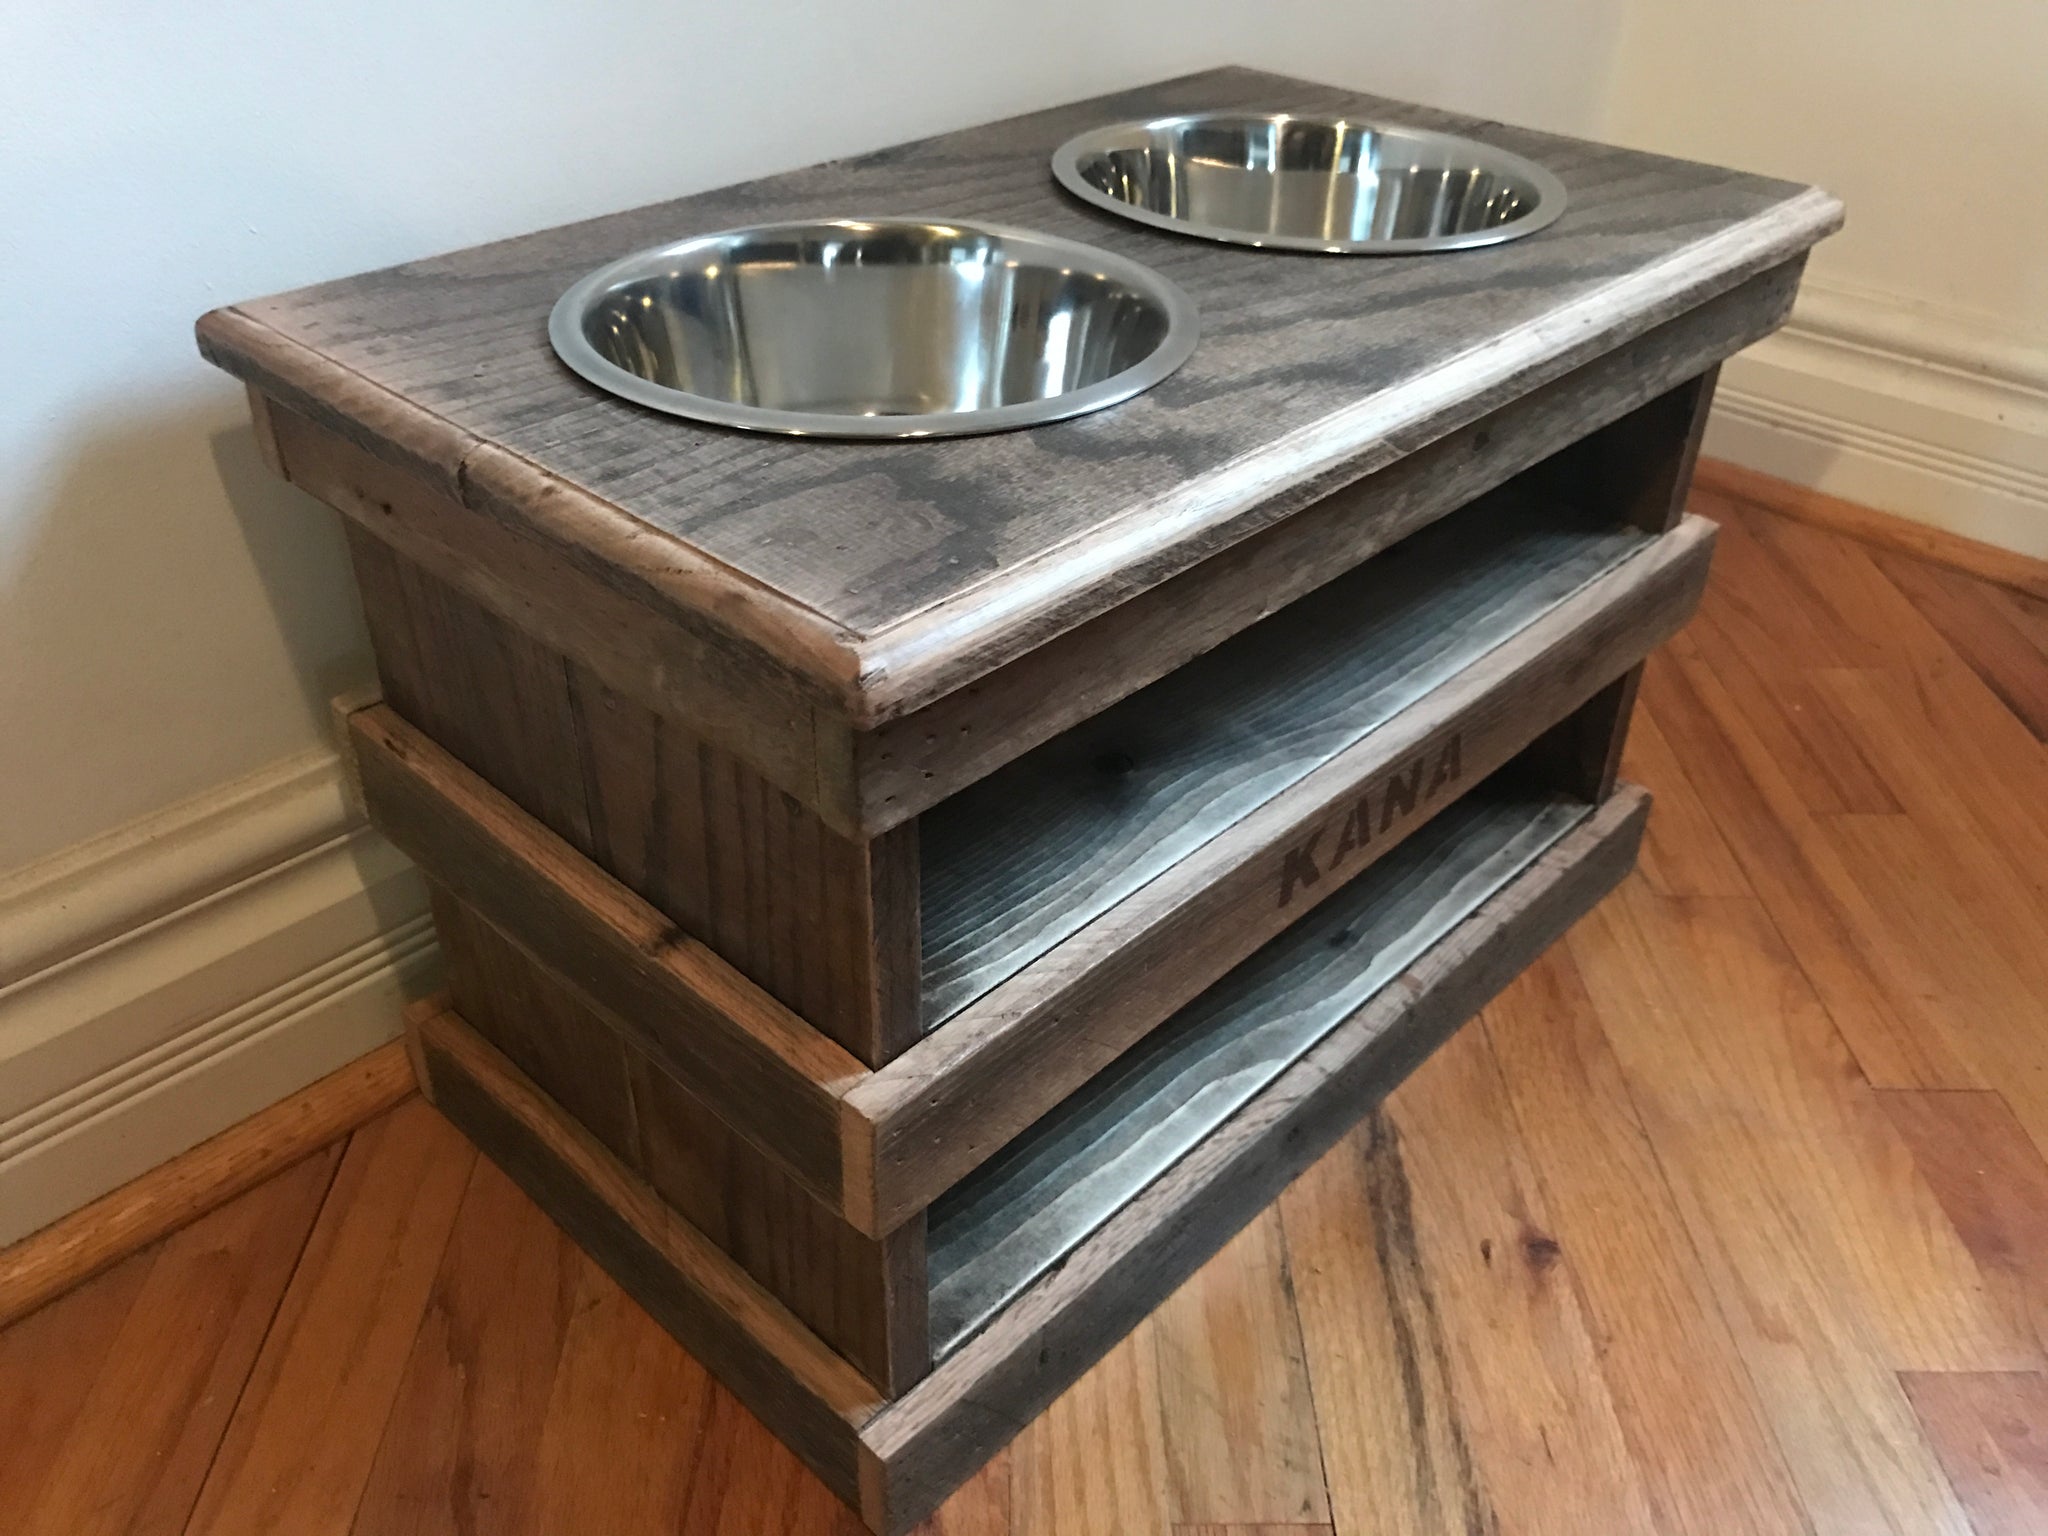 Dog Bowl Stand With Storage Perfect for Two Large Dogs. Rustic Feeder,  Raised Dog Feeder 